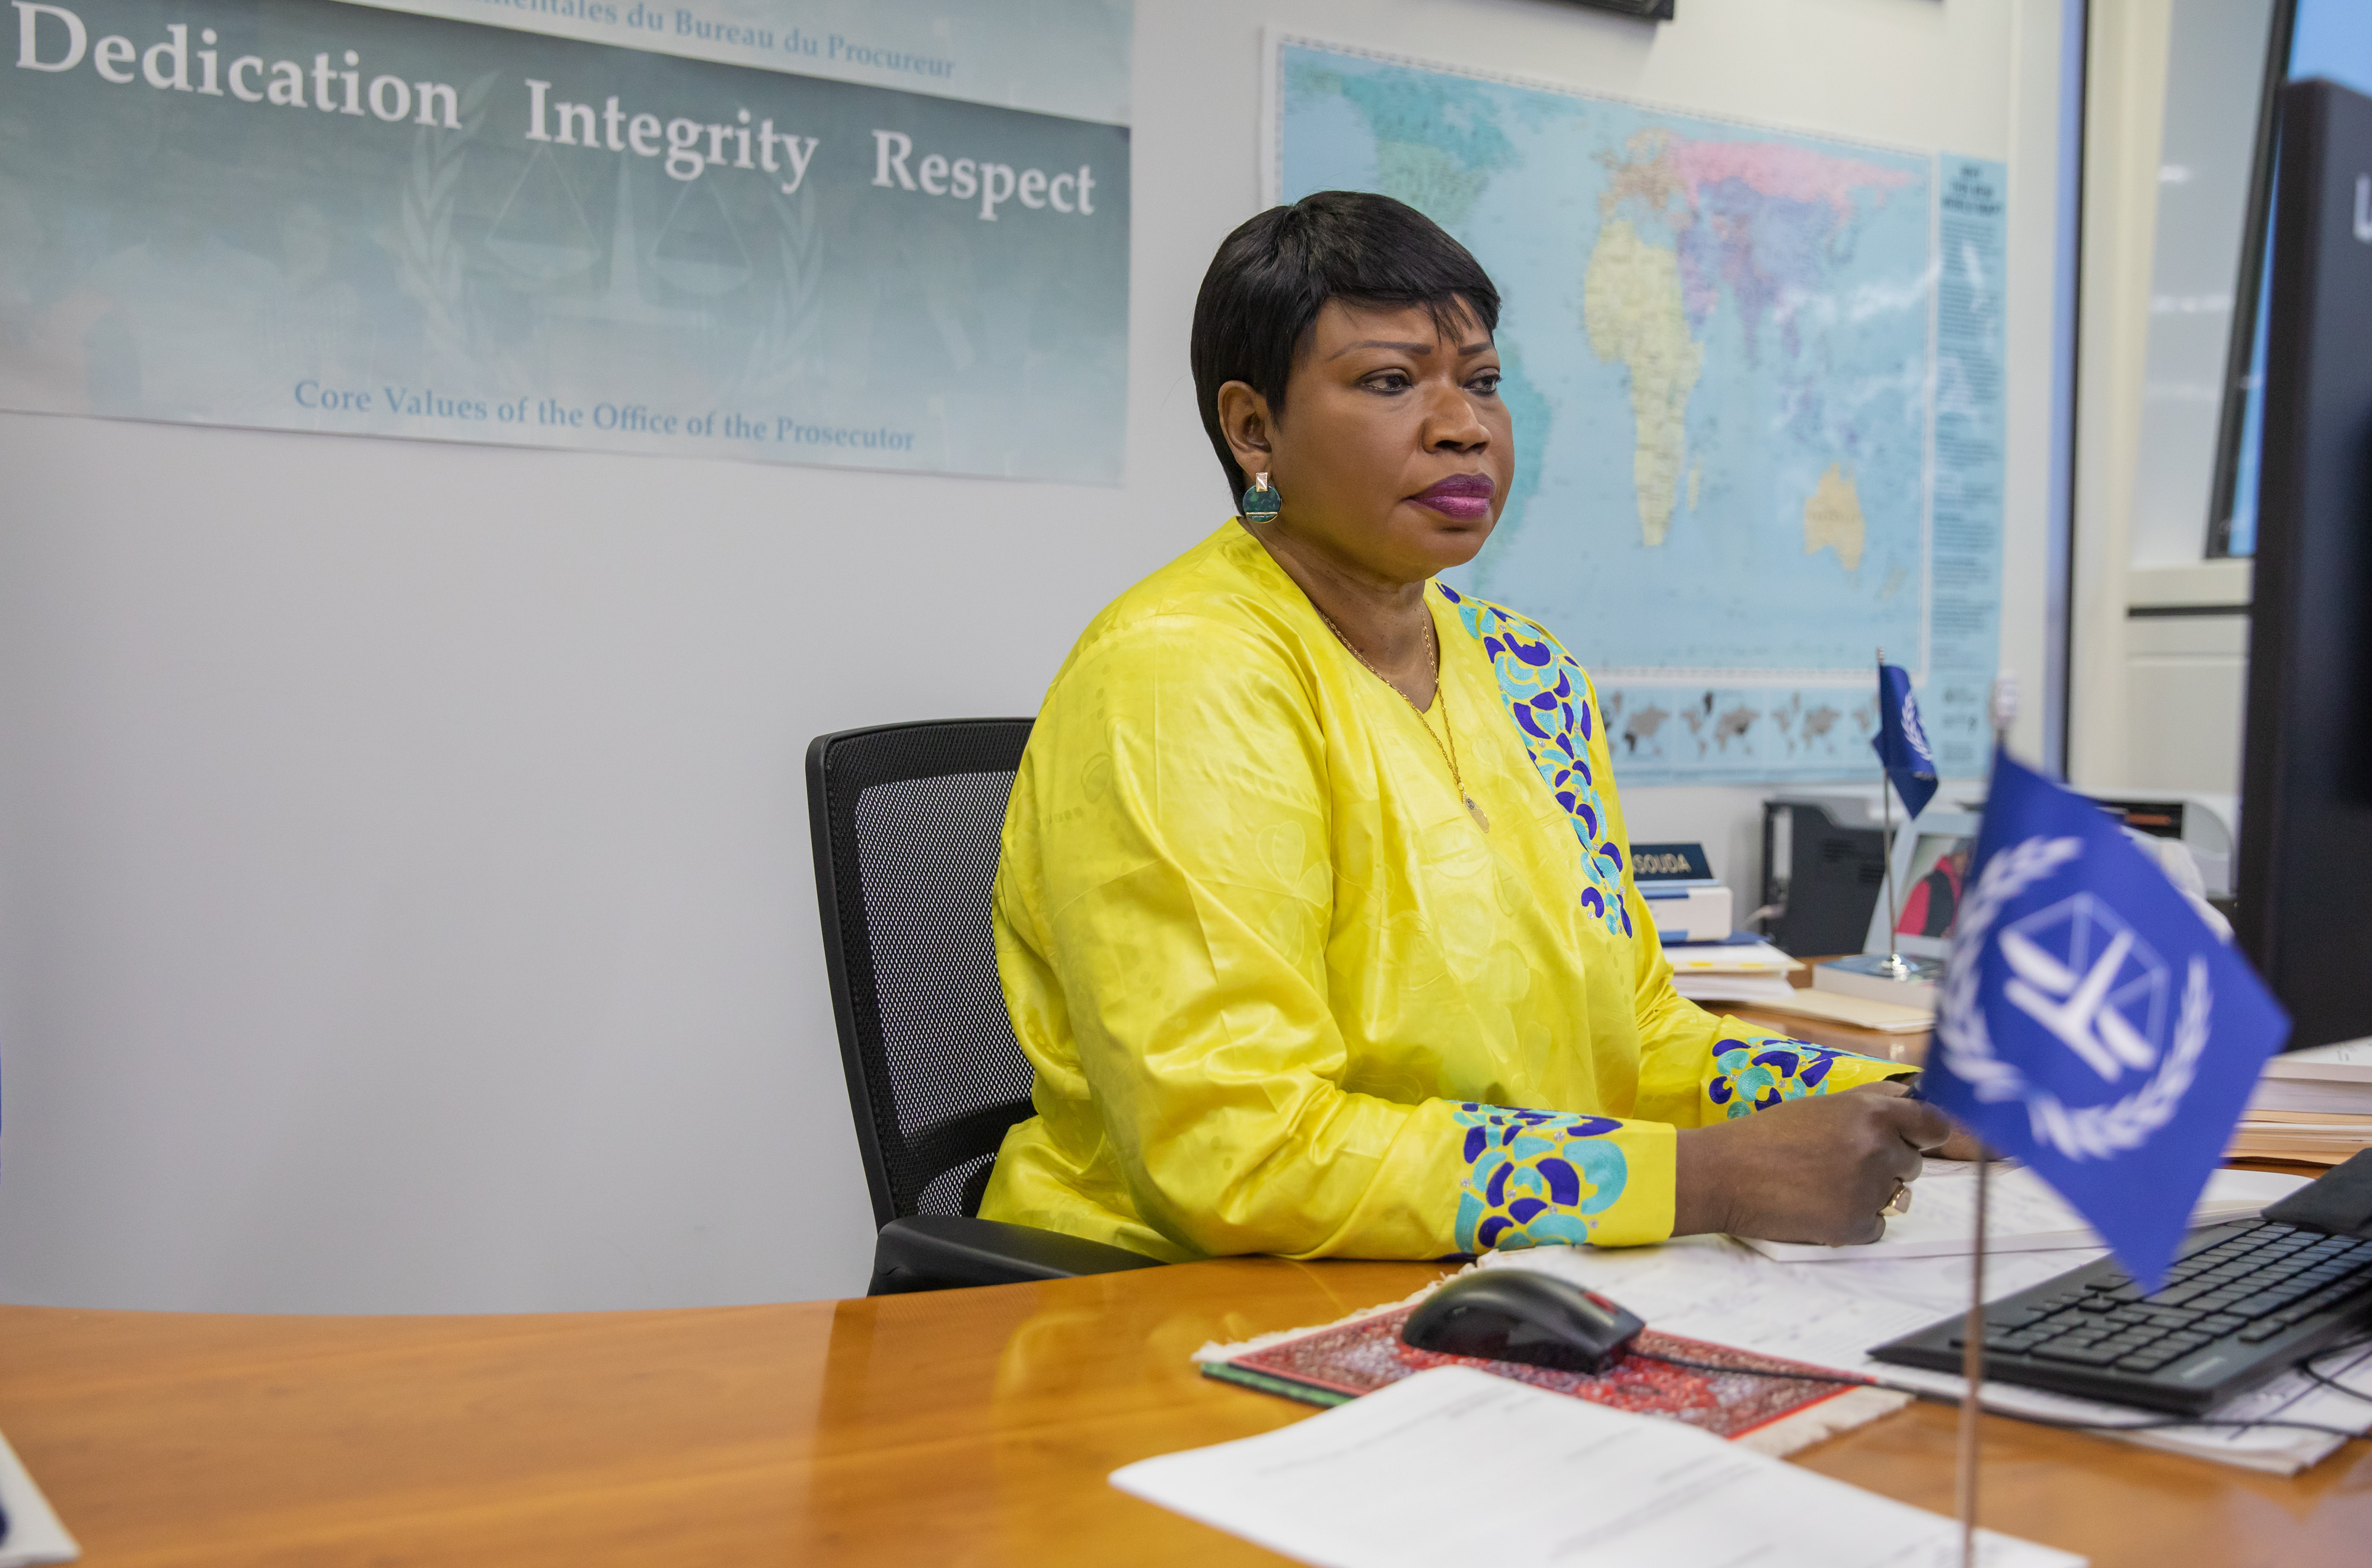 Due to COVID-19 restrictions, ICC Prosecutor, Fatou Bensouda, presents her Office’s 20th report on the Situation in Libya to the UN Security Council, remotely through VTC ©ICC-CPI